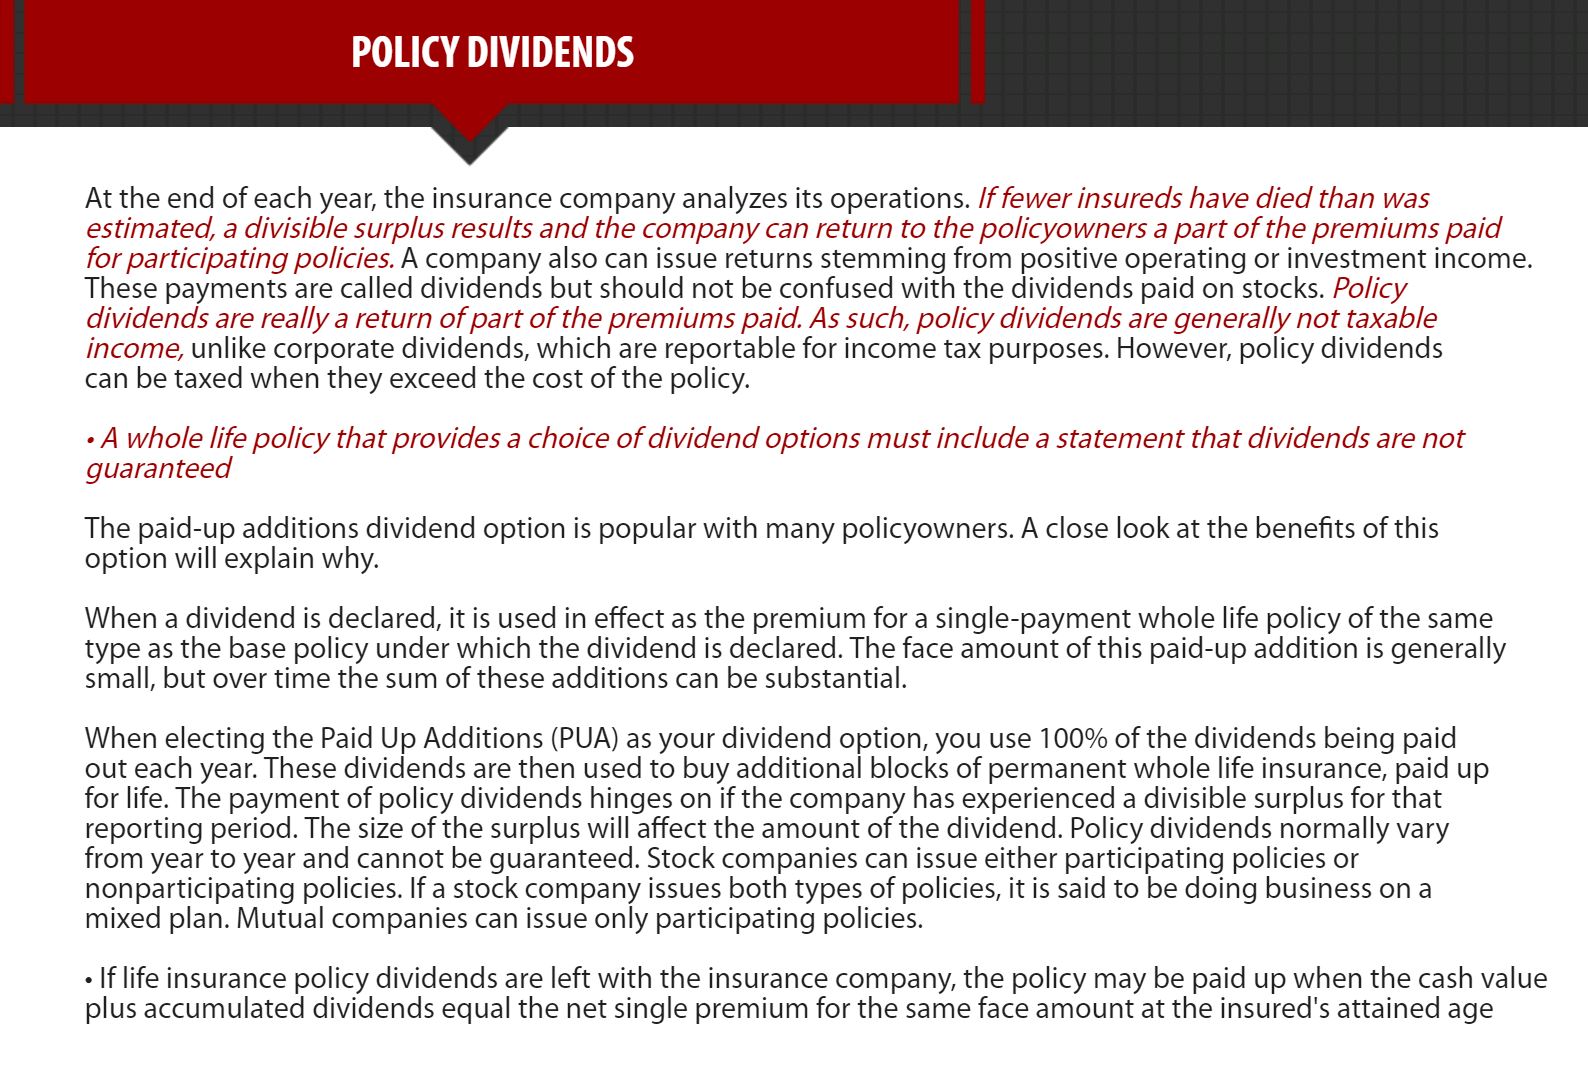 How Are Policyowner Dividends Treated In Regards To Income Tax